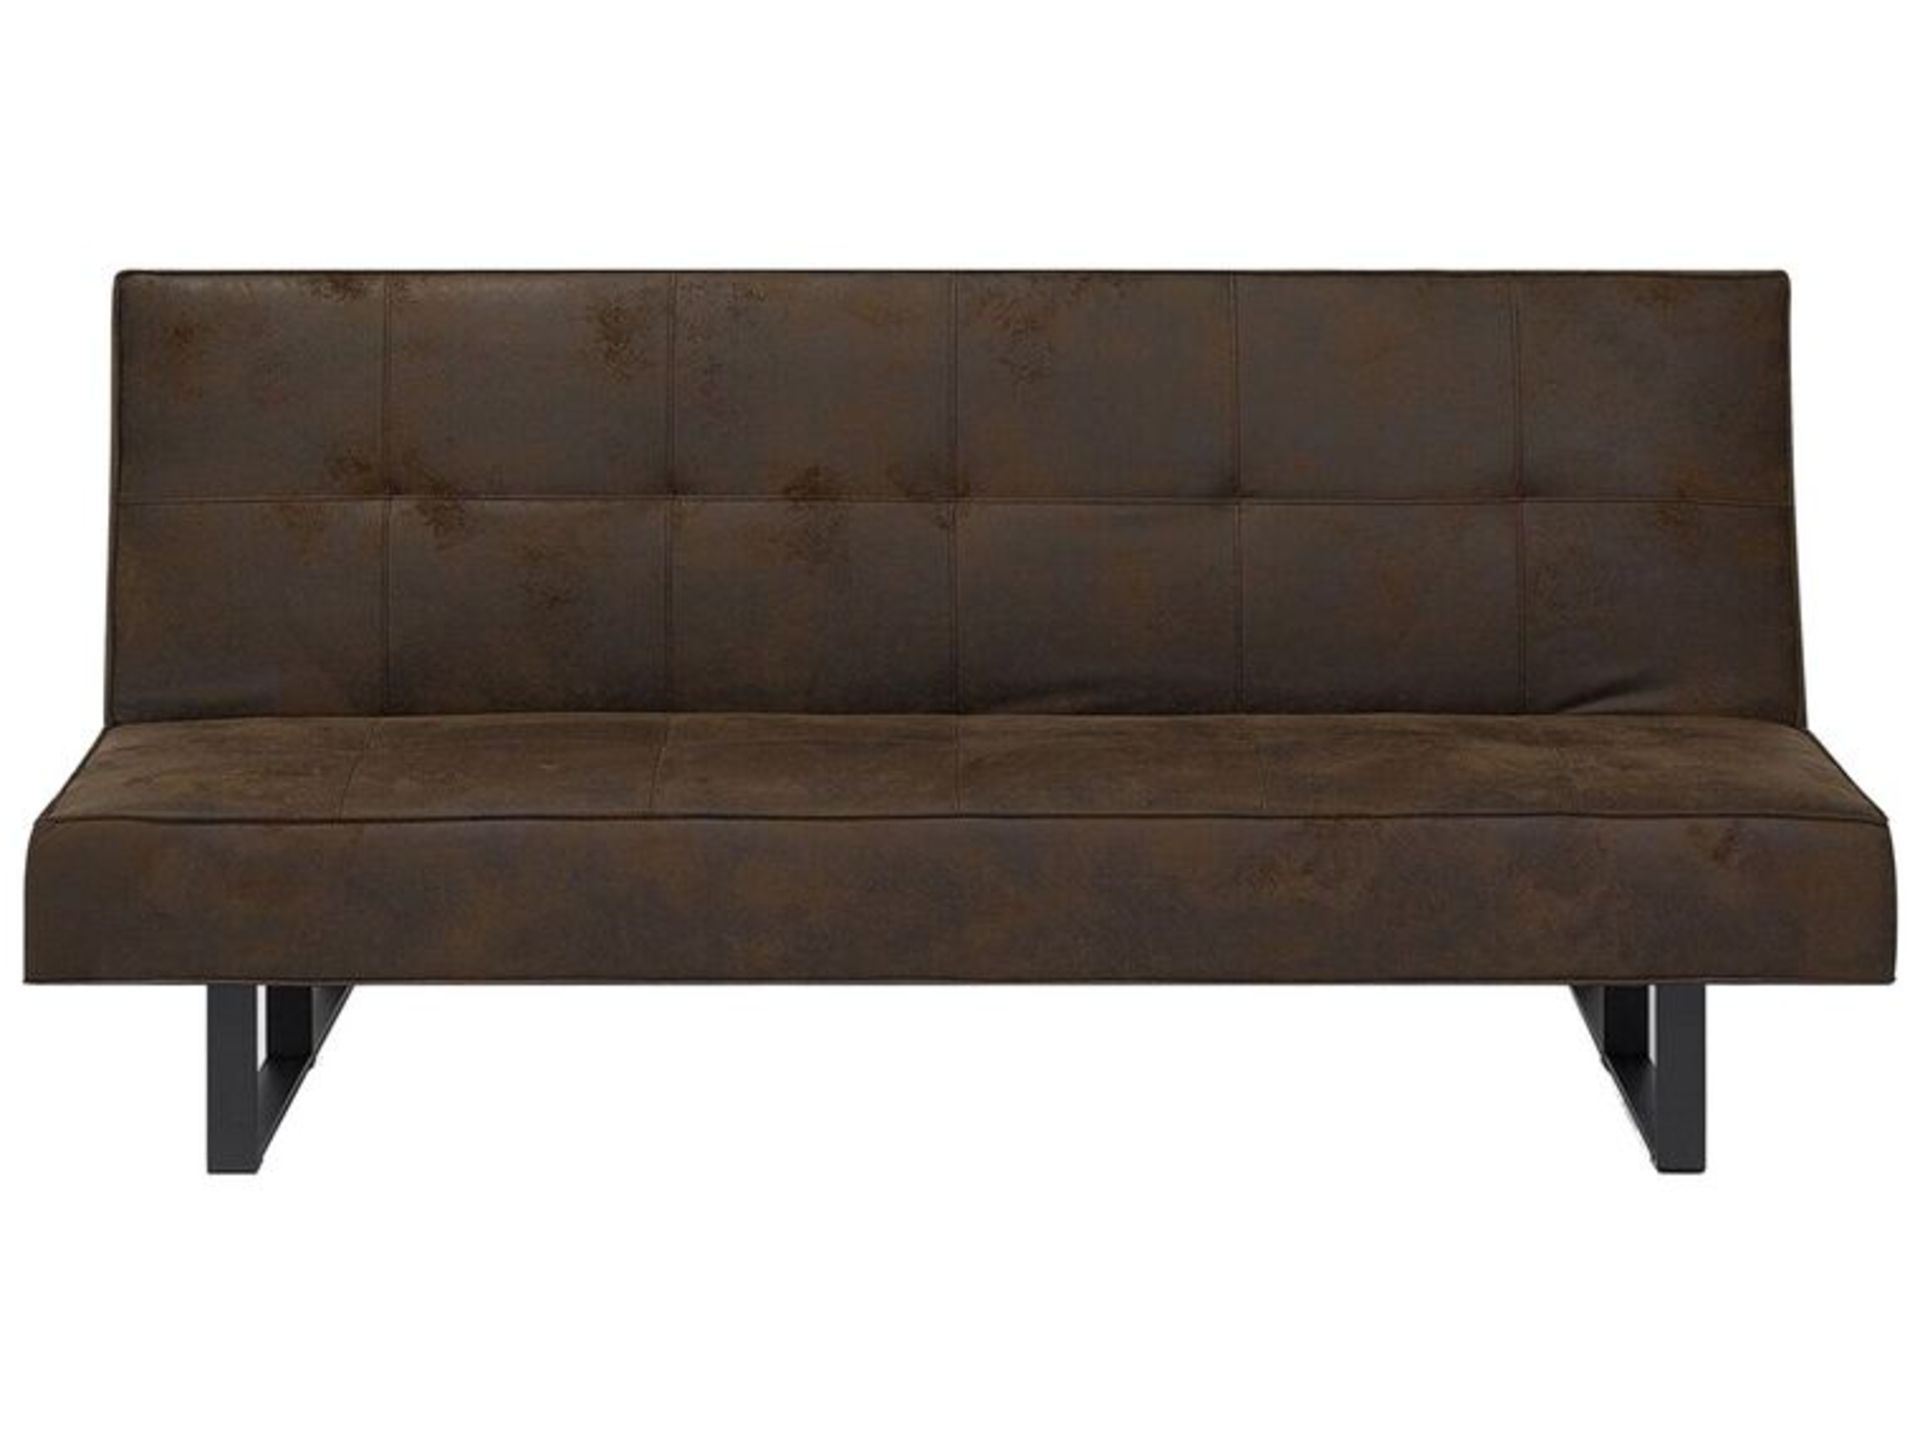 Derby Faux Leather Sofa Bed Brown. - R14. RRP £649.99. This sleek and practical sofa bed works in